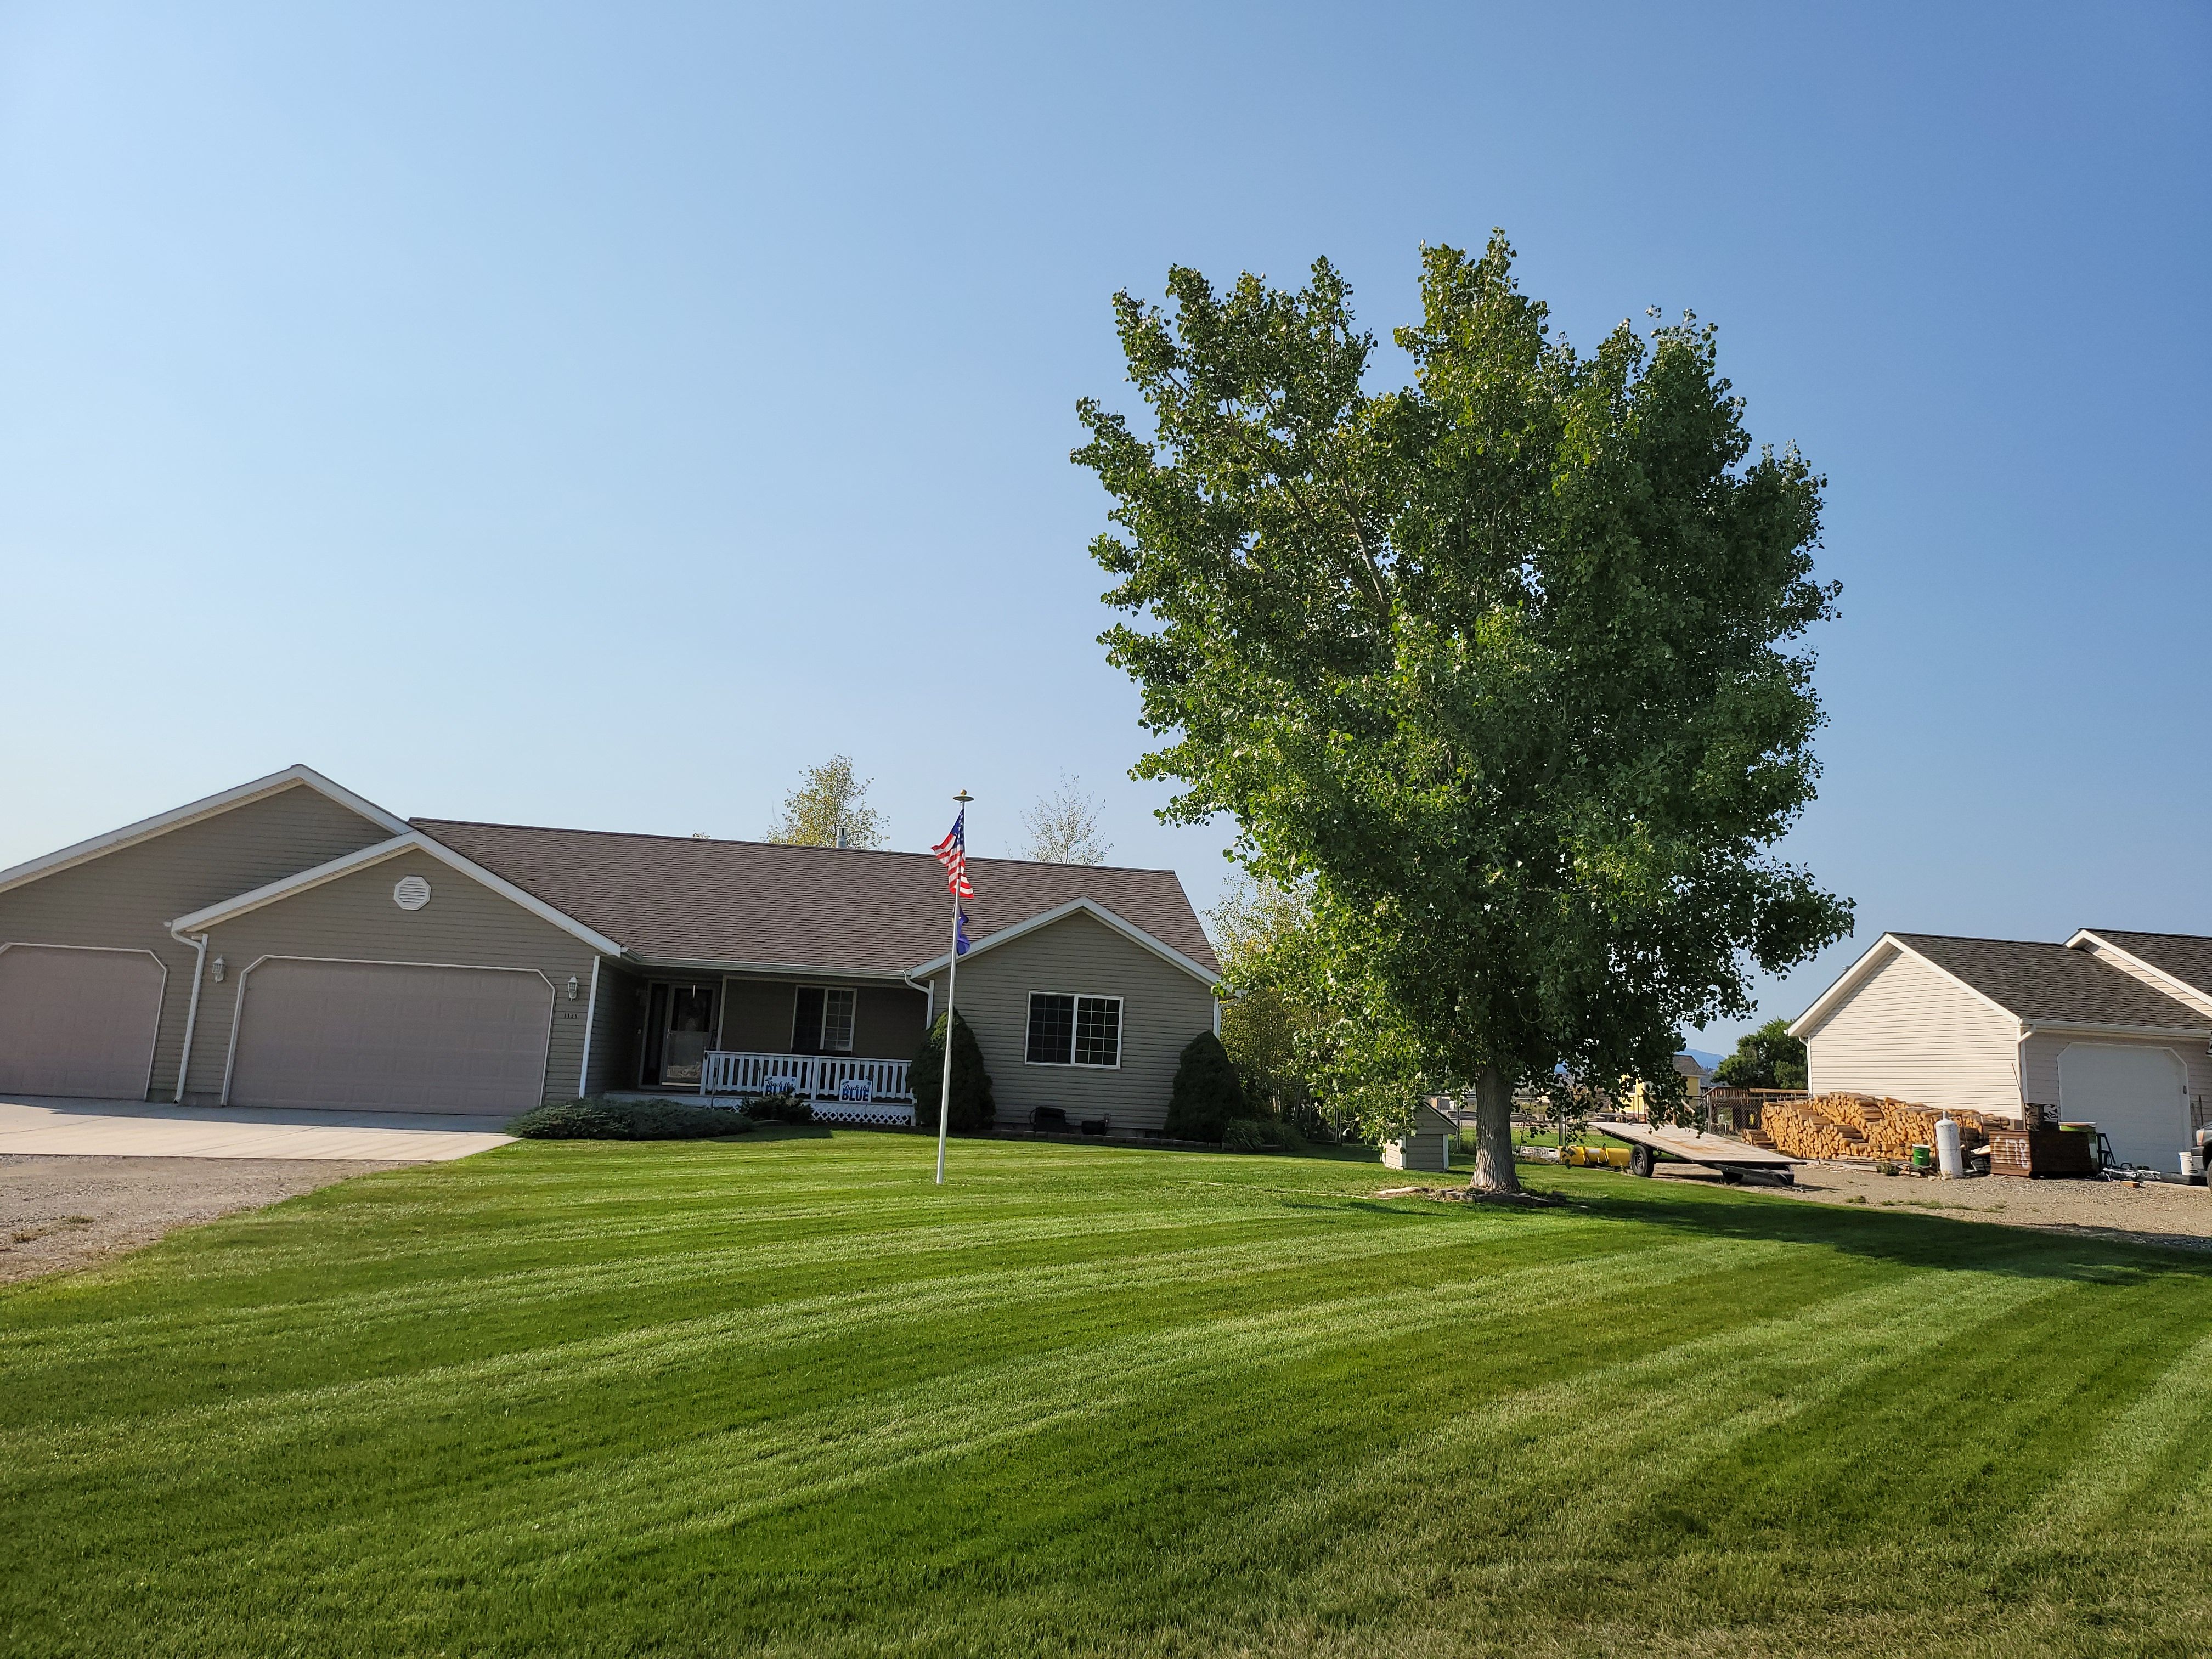 Landscaping for Yeti Snow and Lawn Services in Helena, Montana